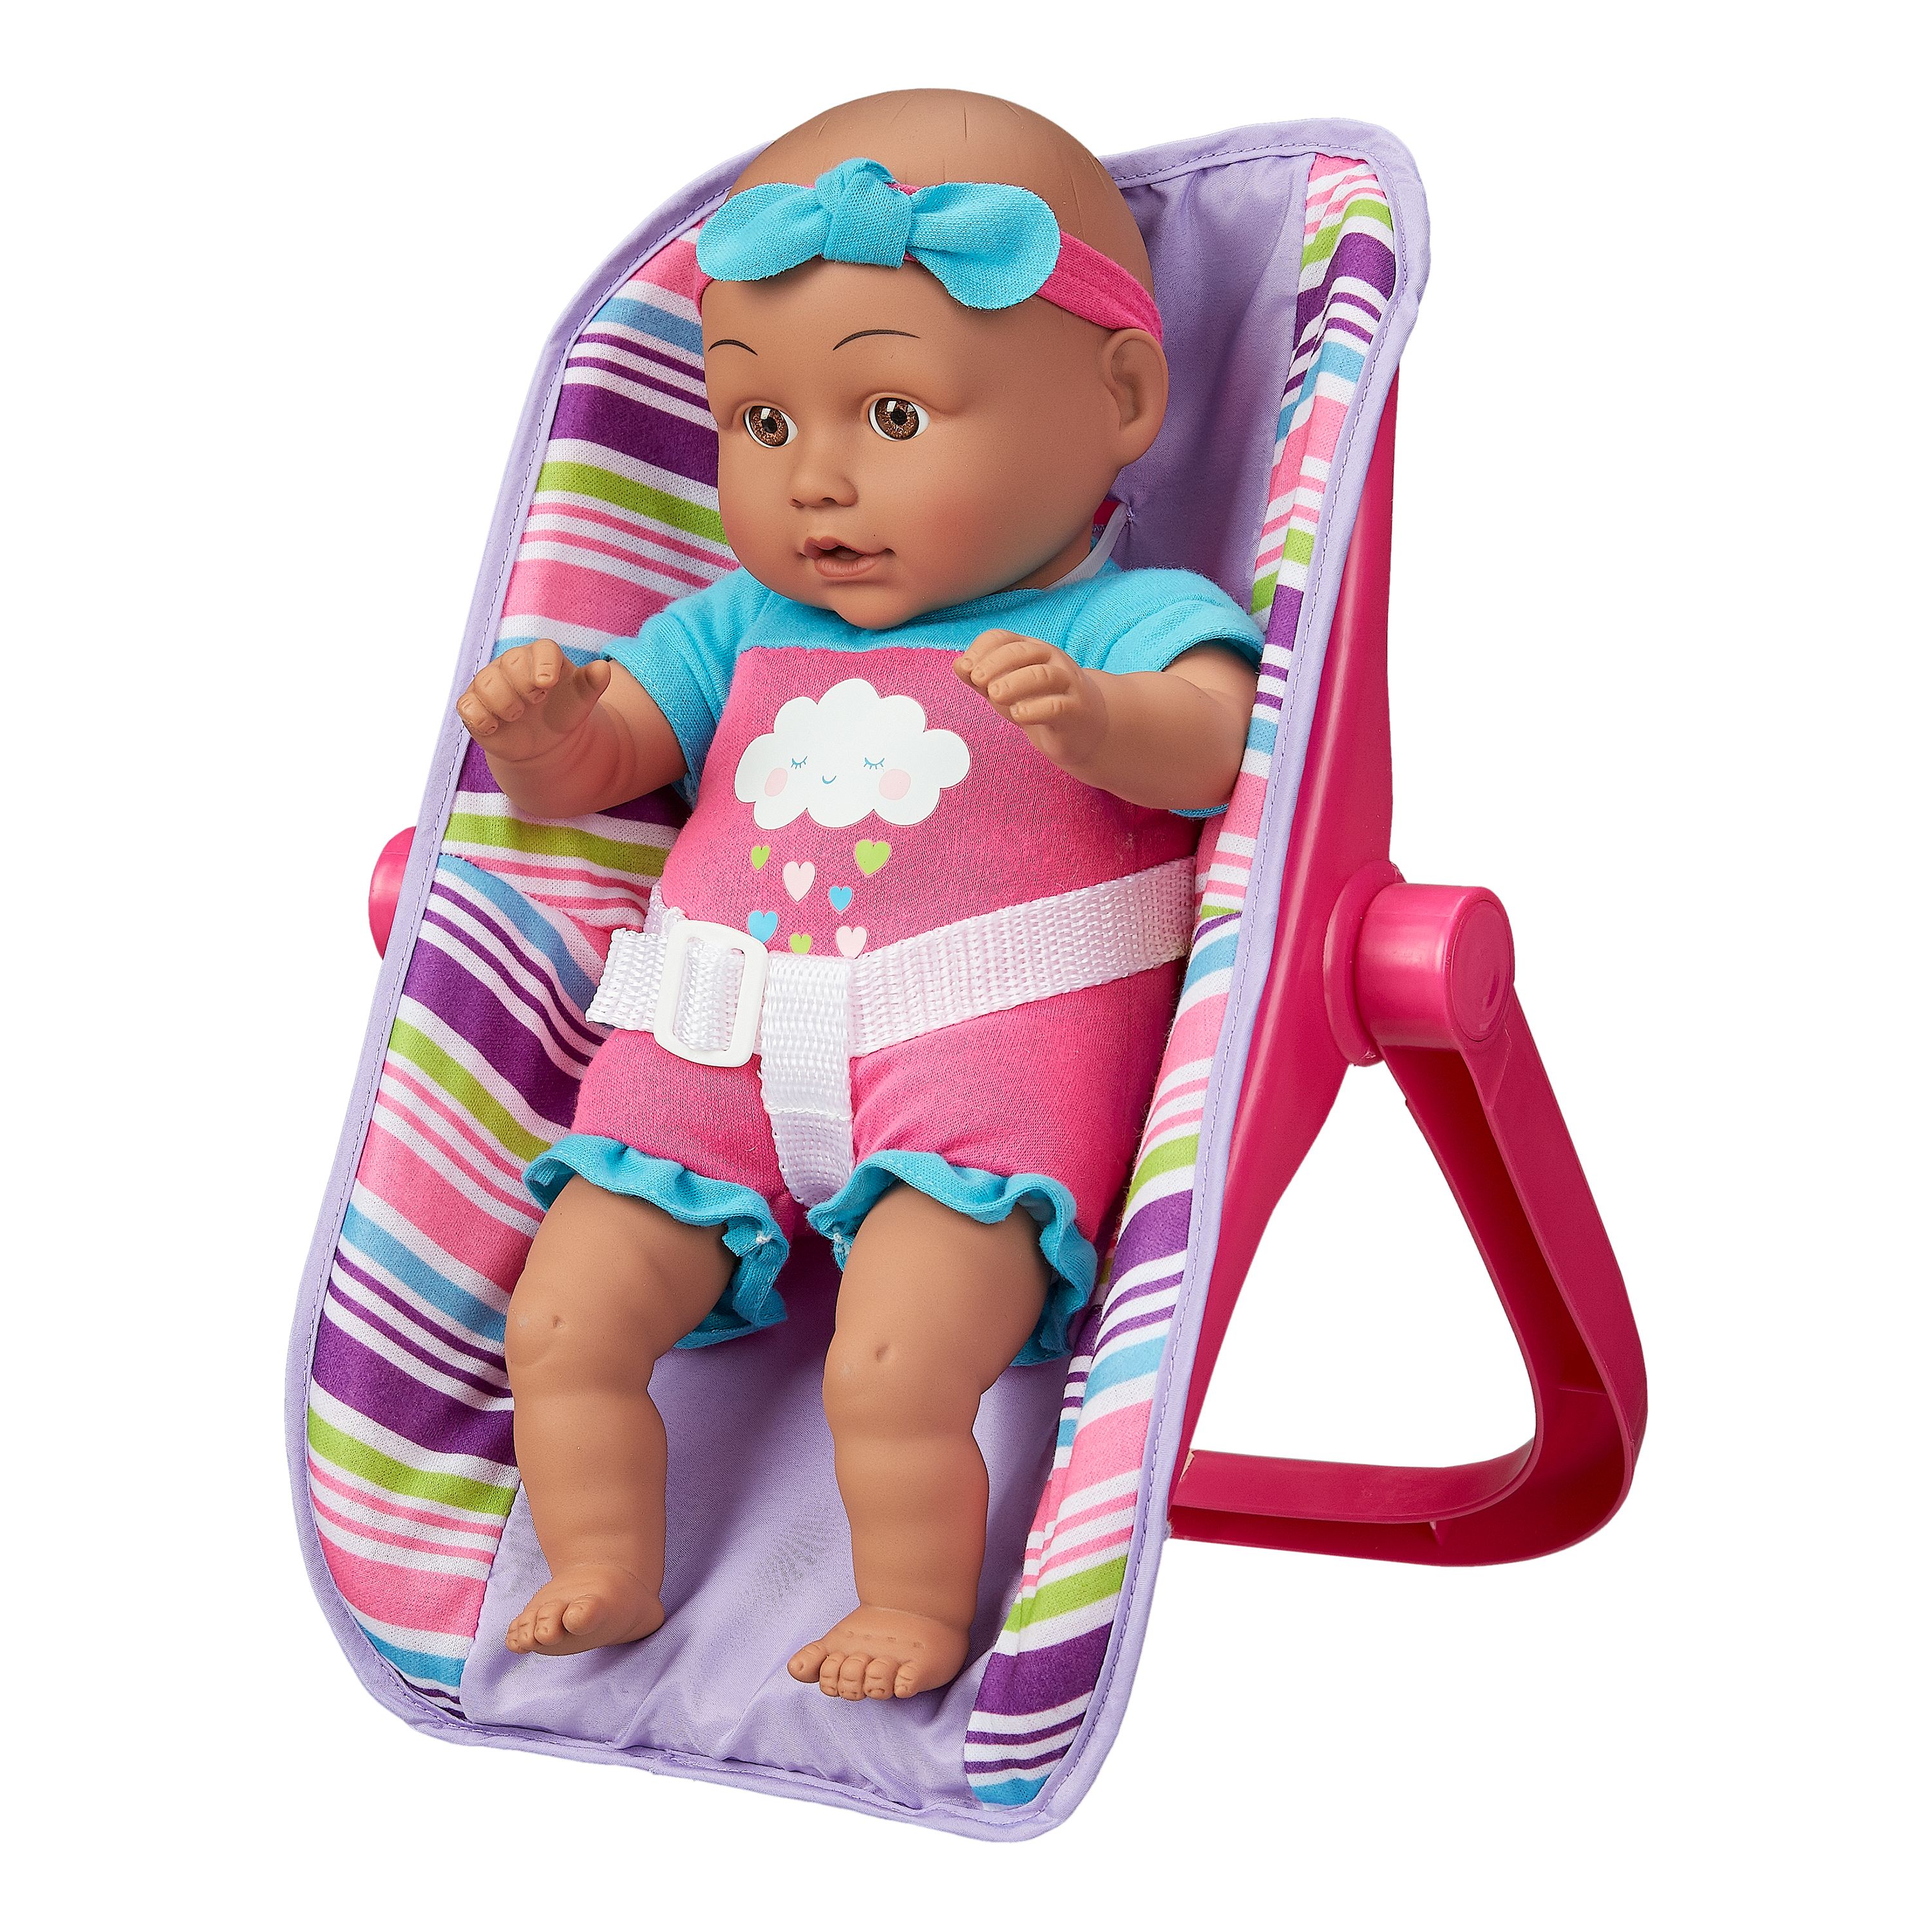 My Sweet Love 13" Baby Doll with Carrier, Pink, African American - image 1 of 4